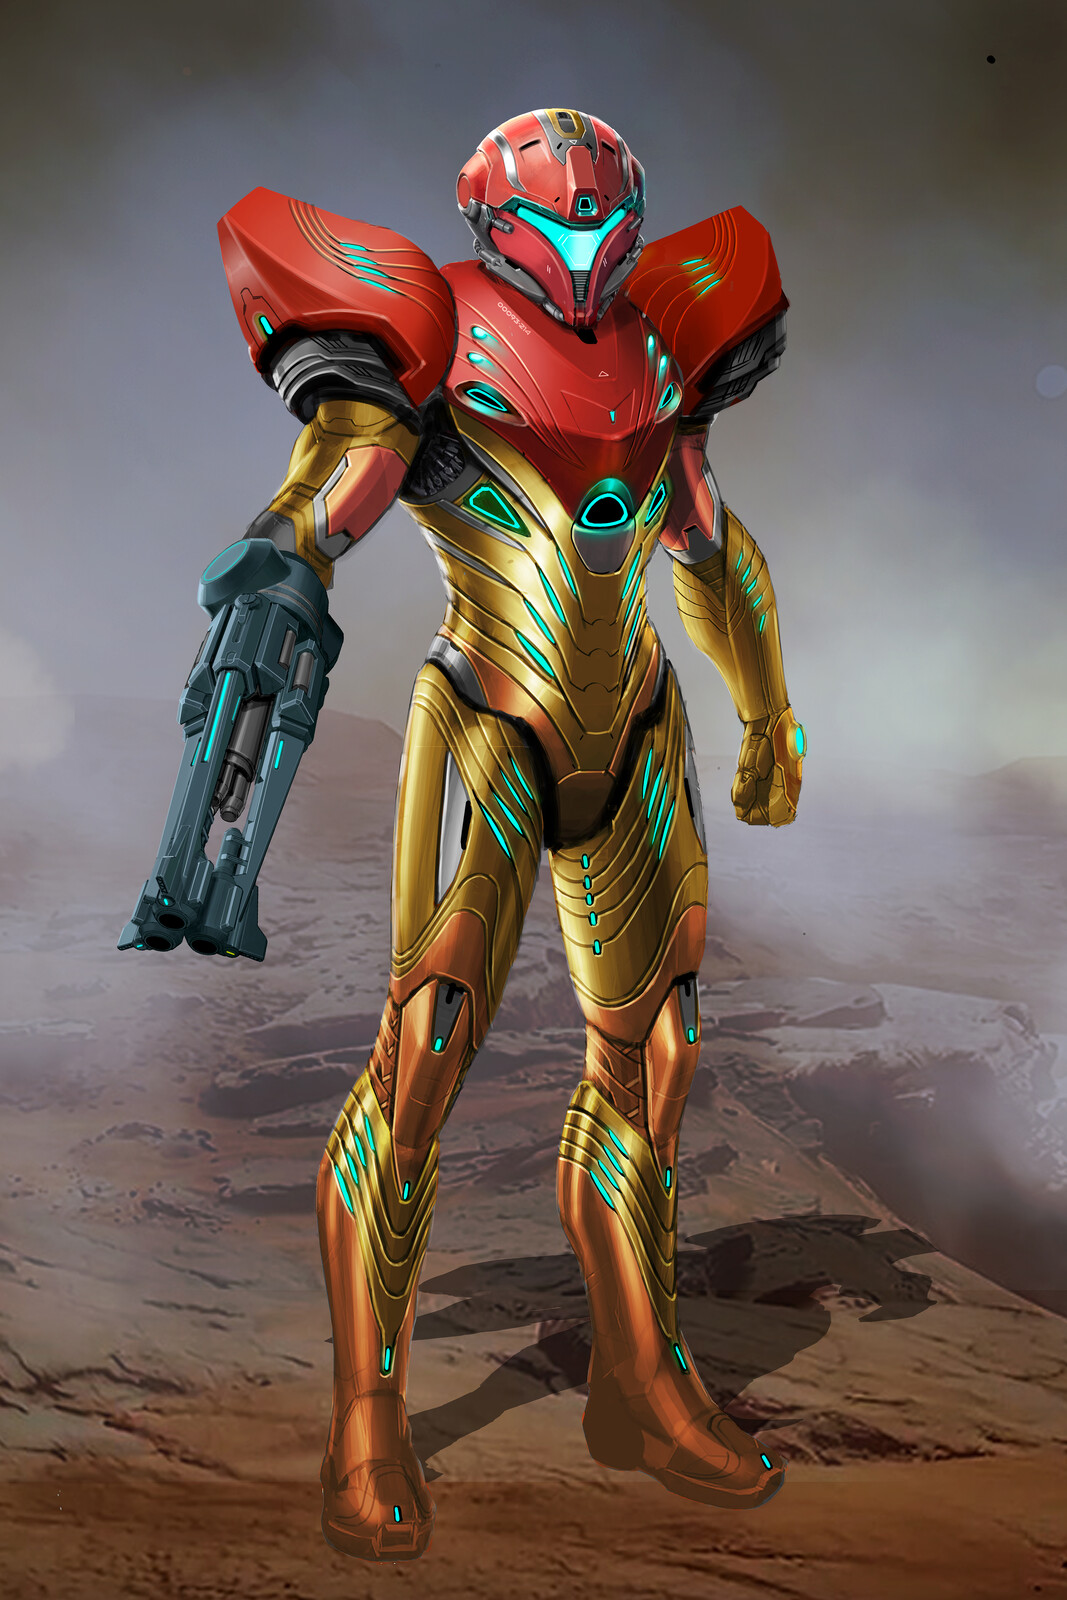 Samus suit with more alien and organic influence